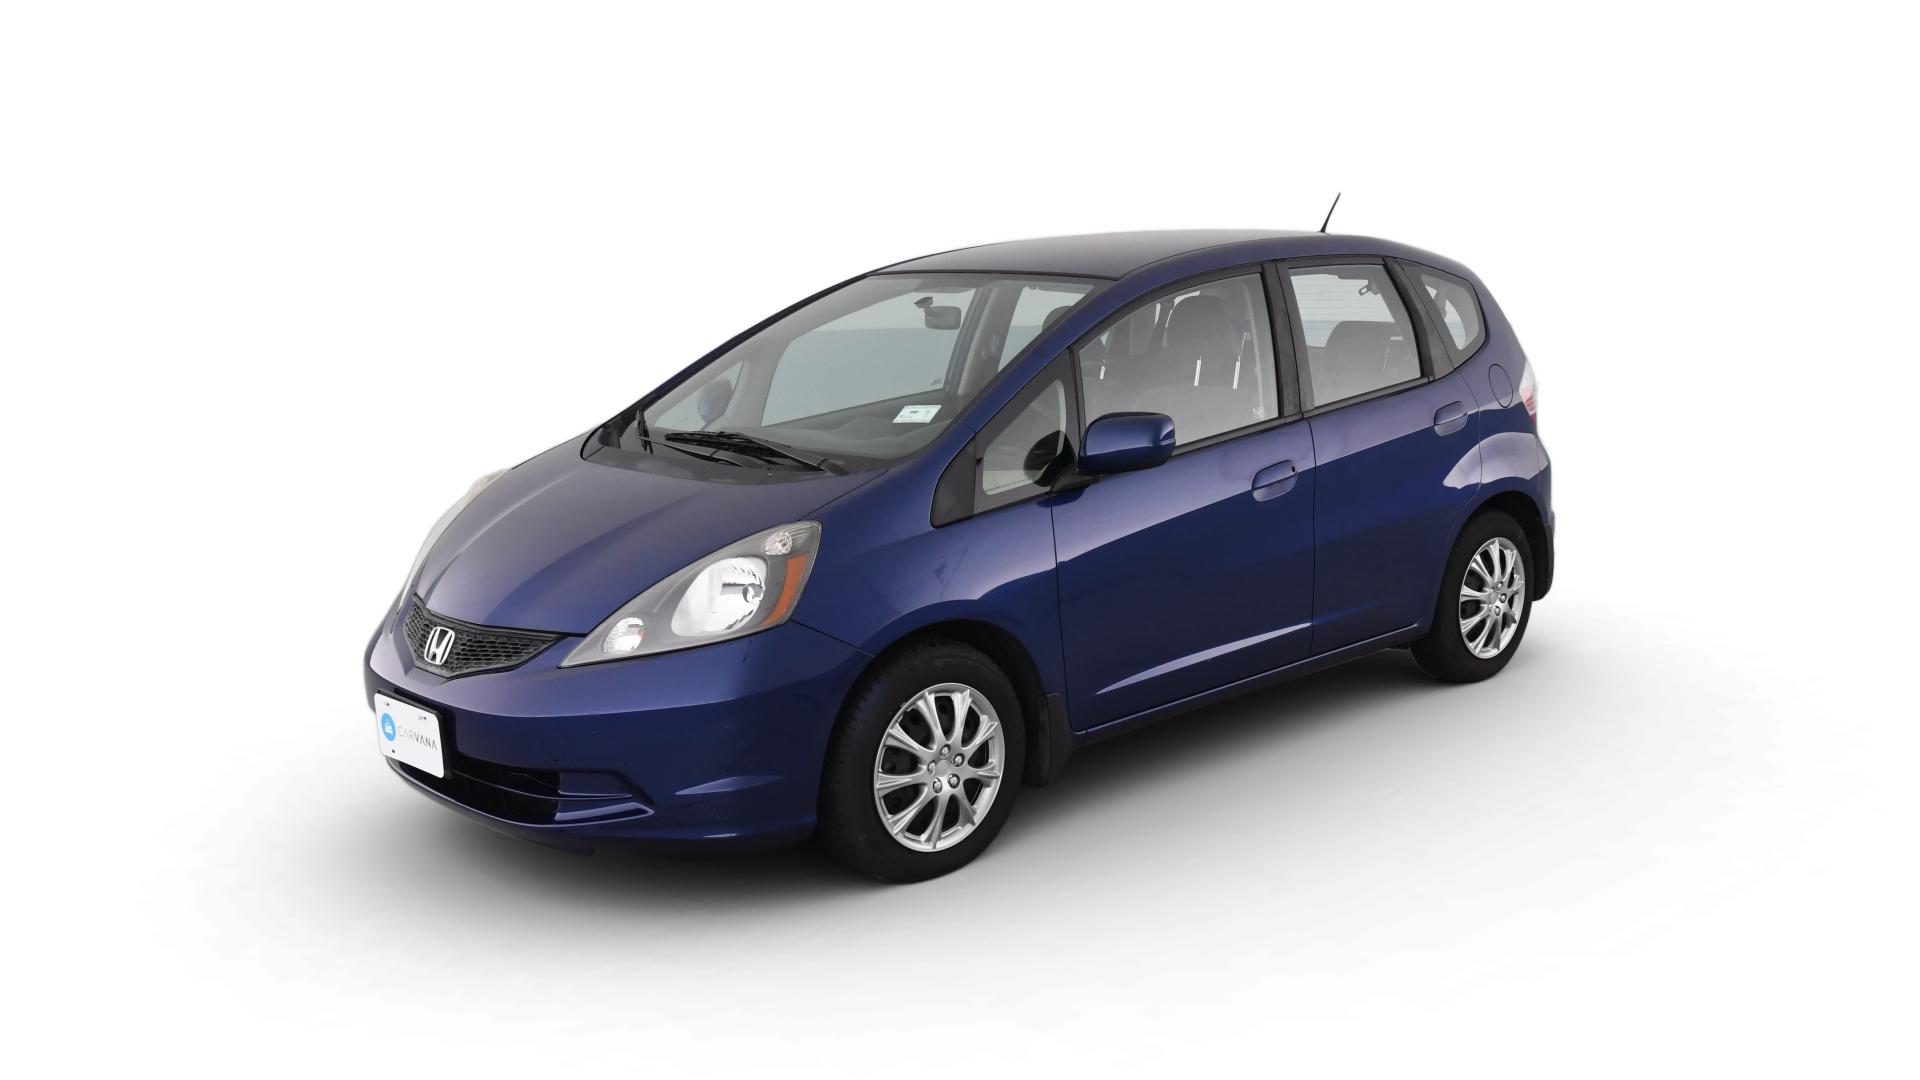 Used 2012 Honda Fit For Sale Online | Carvana